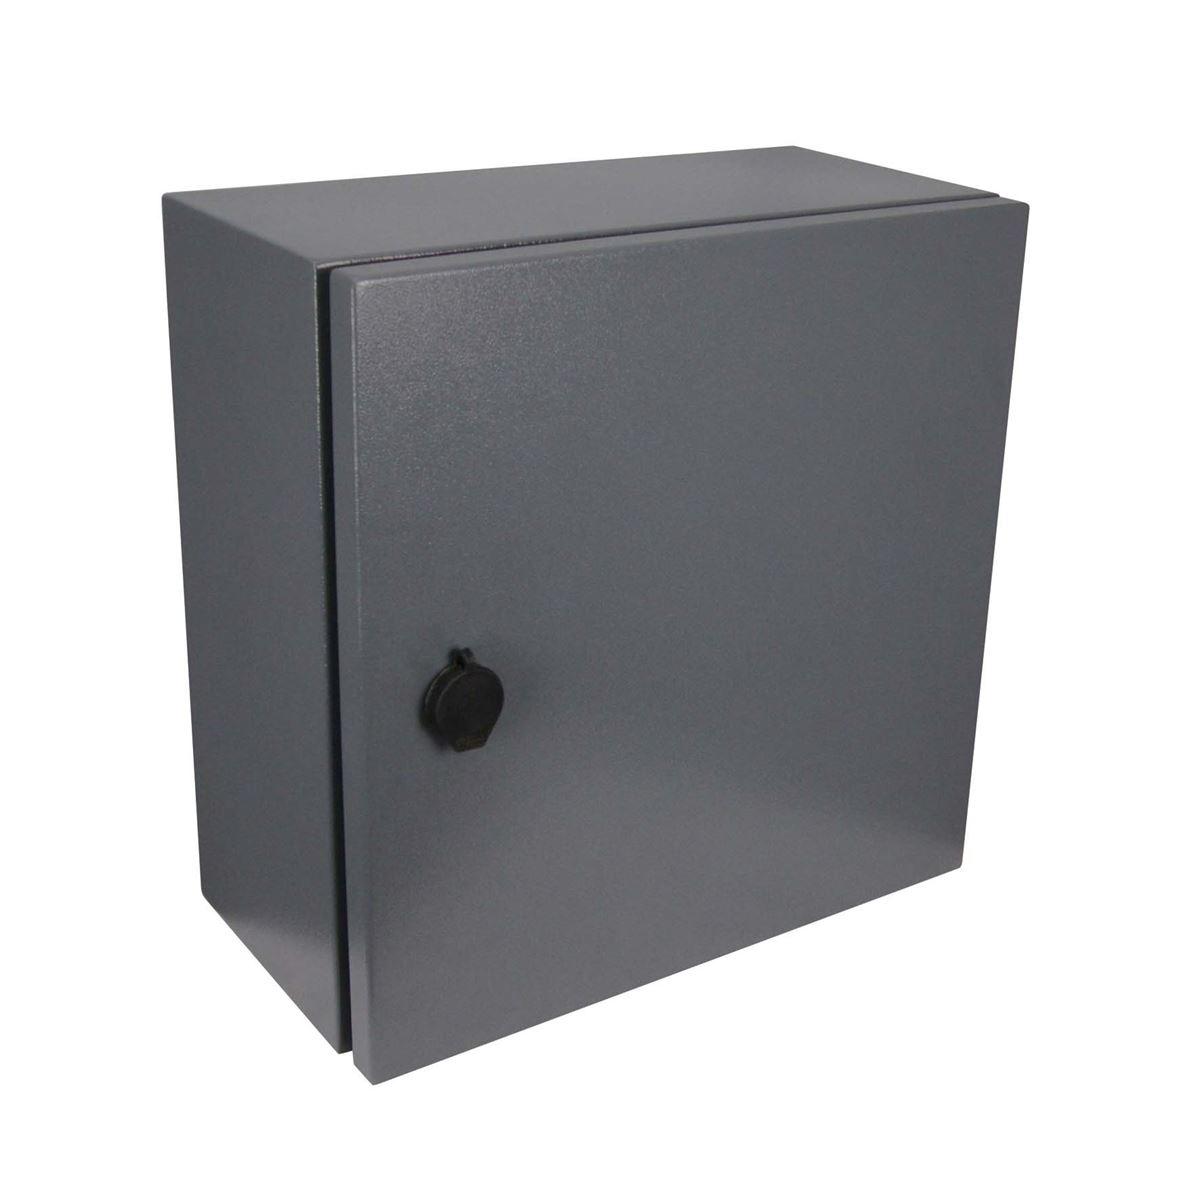 400 x 400 Outdoor Steel Electrical / IRS Cabinet